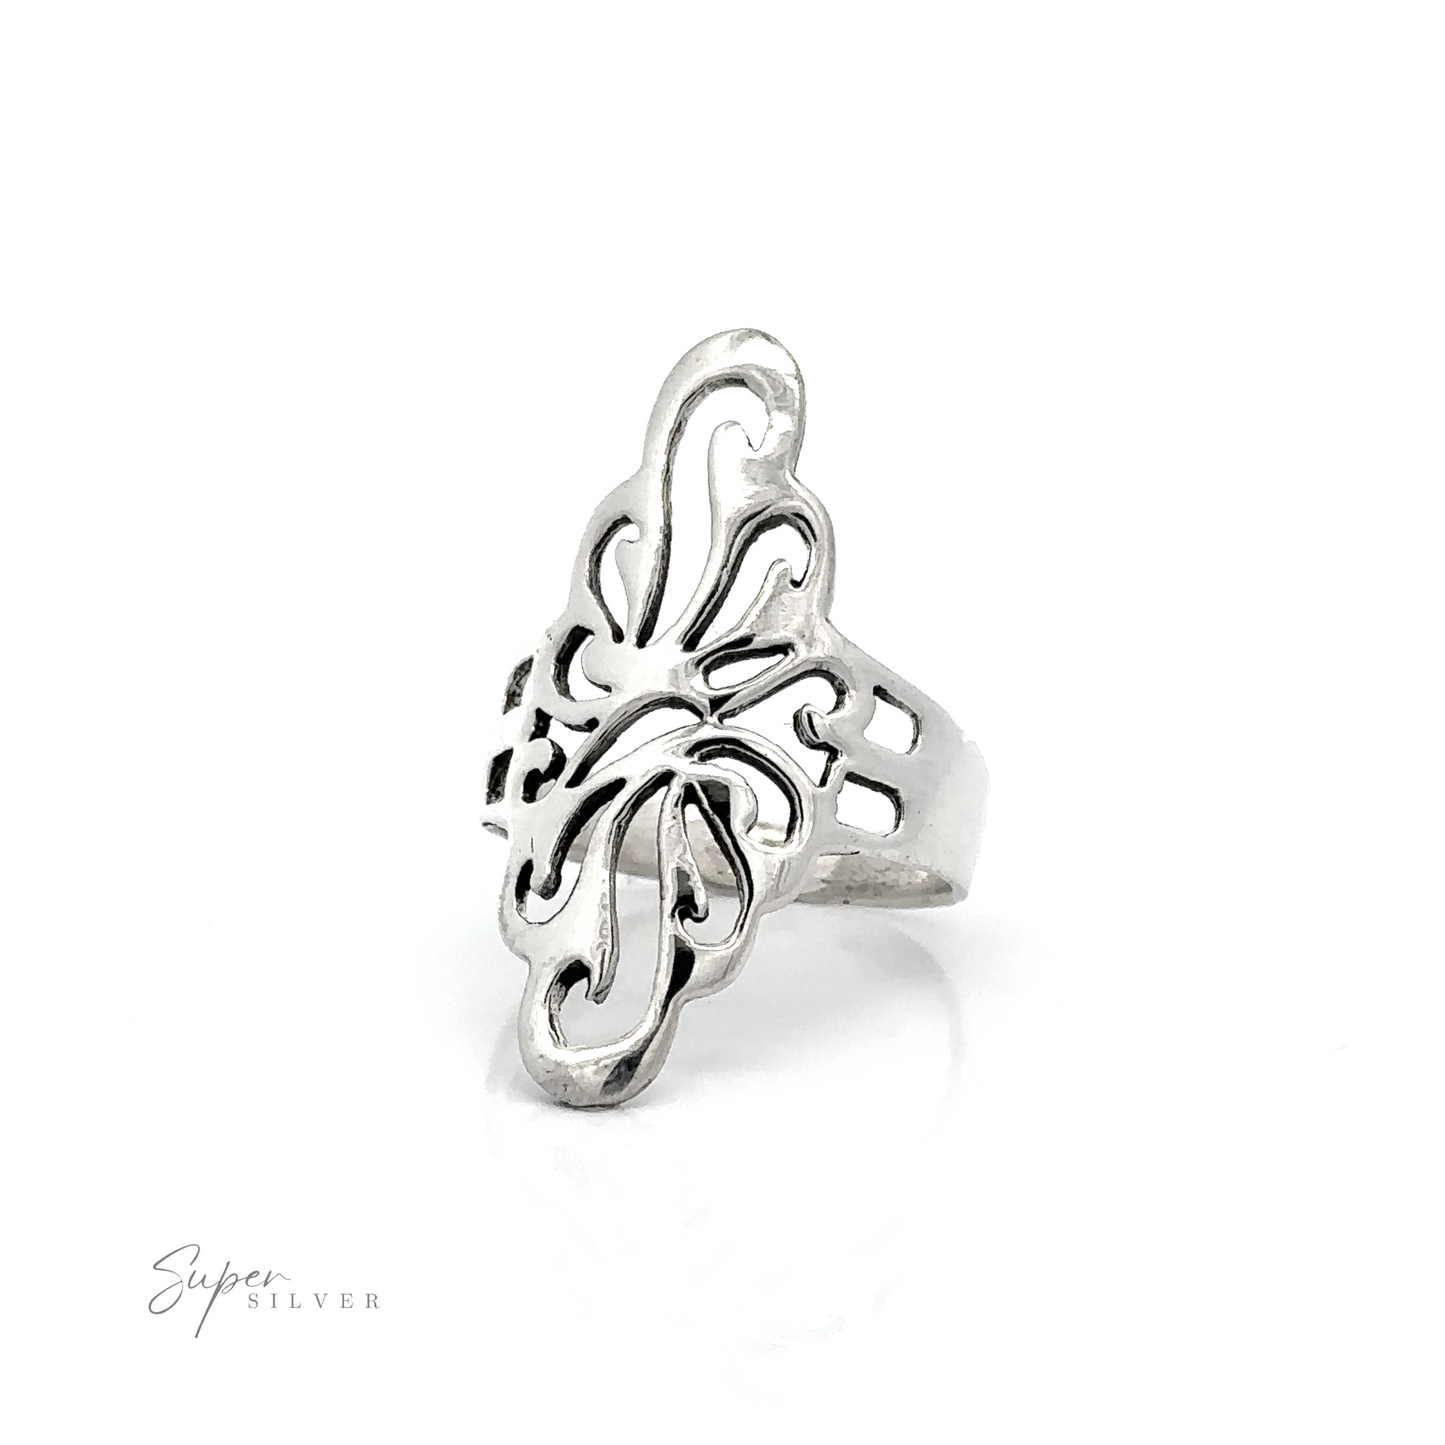 A stunning Silver Southwest Inspired Freeform Ring with an intricate southwest style pattern.